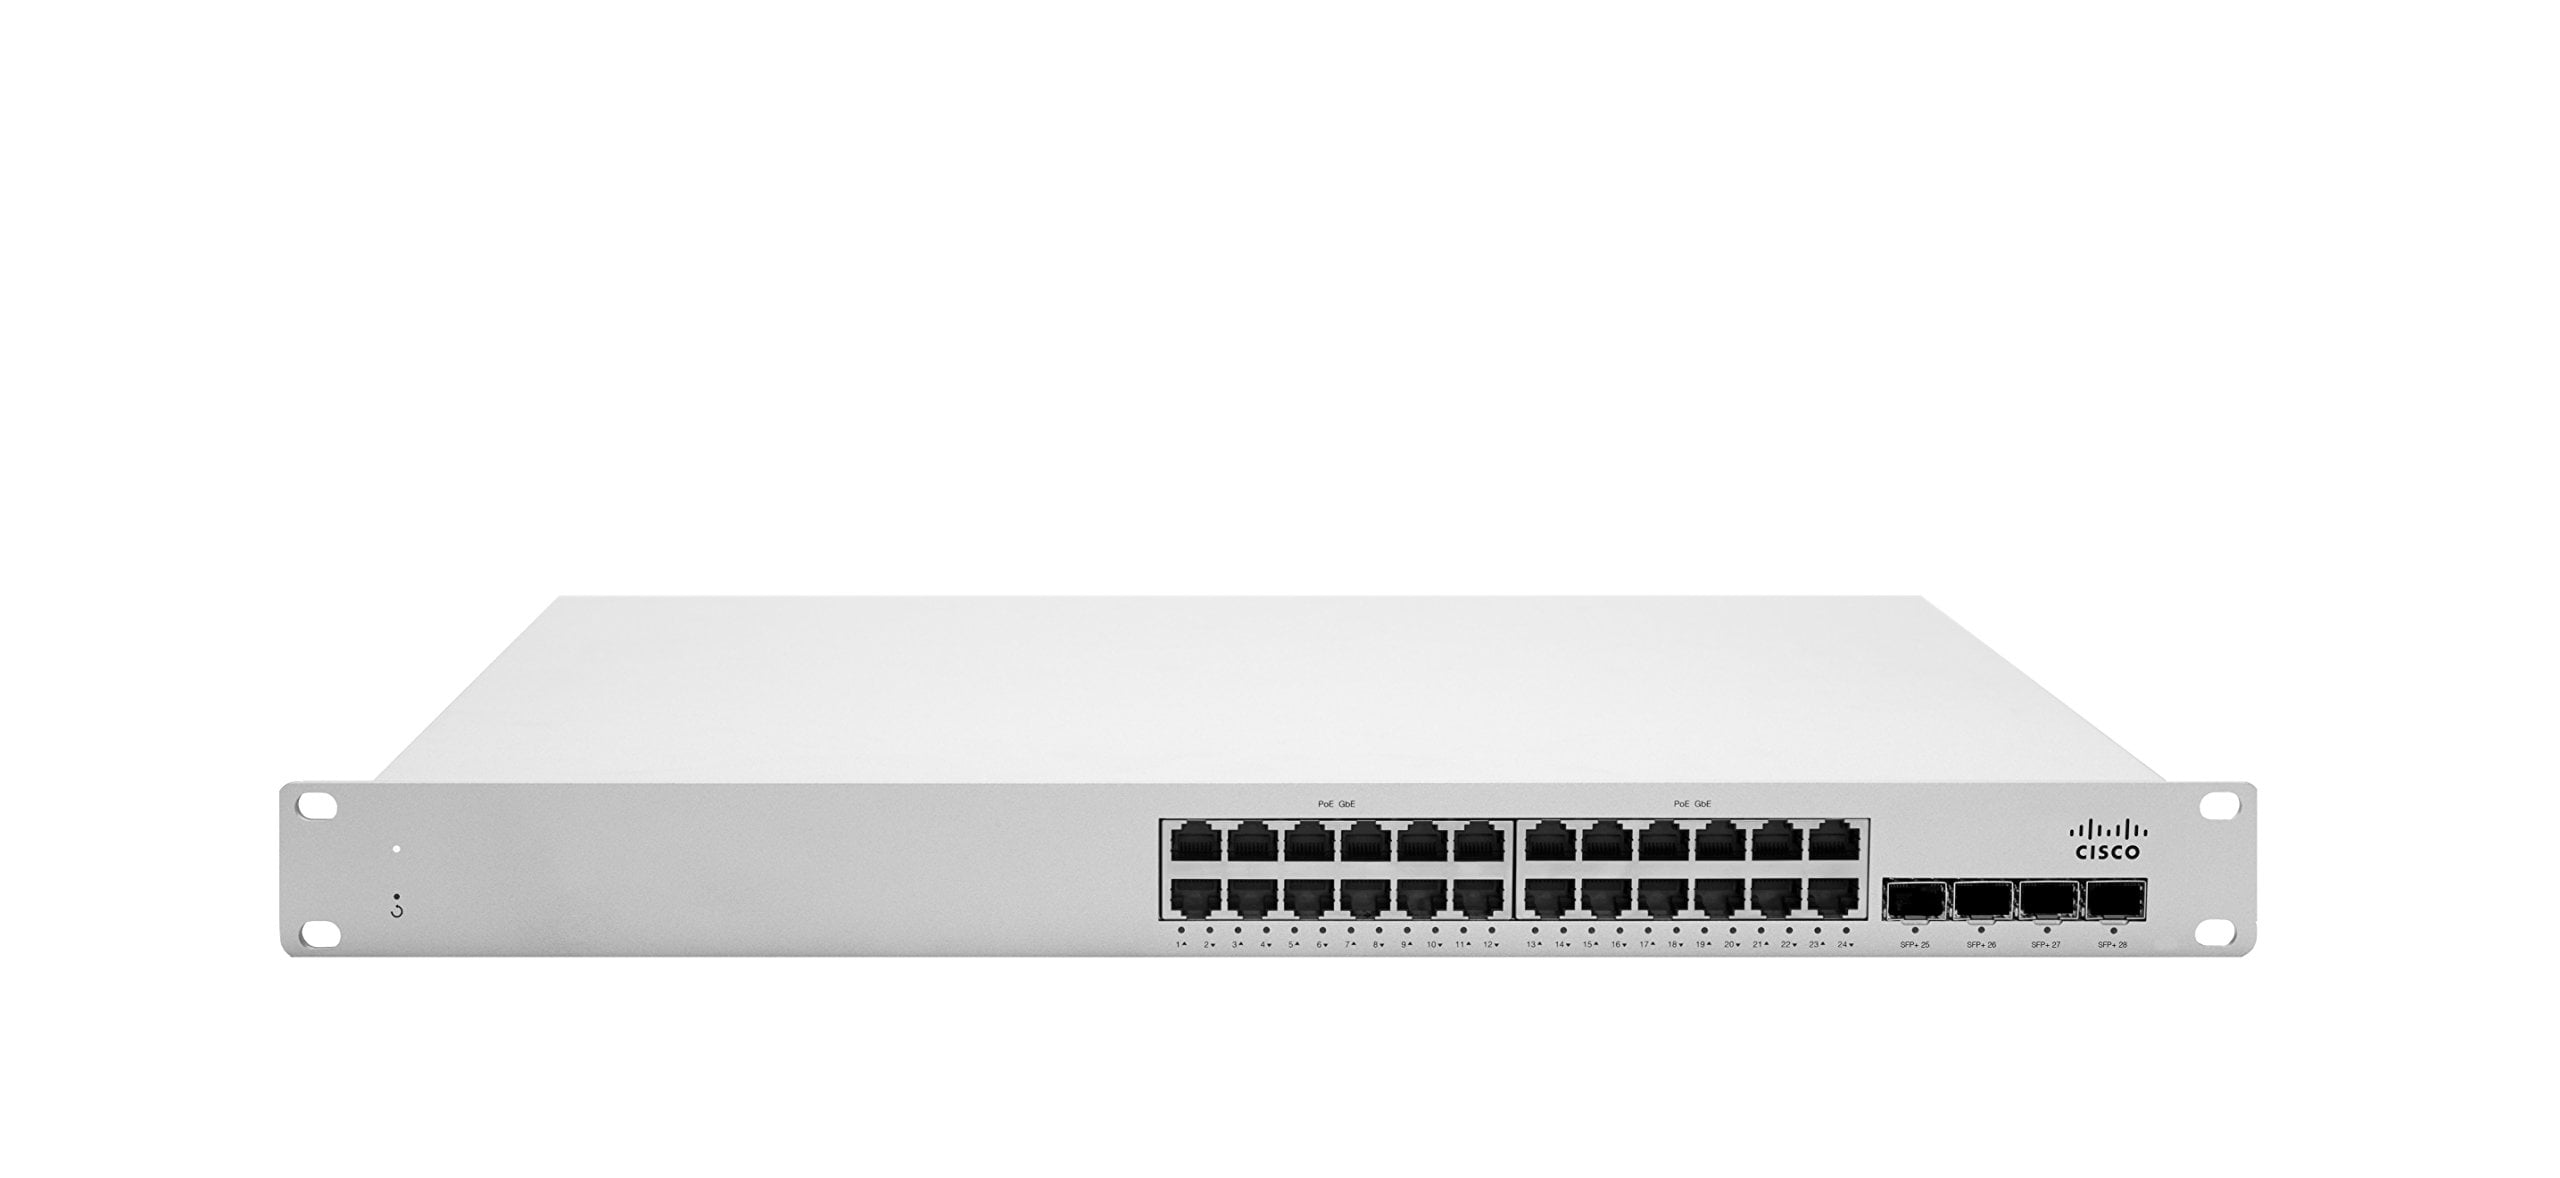 Reidubo 18 Ports Ethernet Gigabit PoE Switch,16 Port PoE Network Switch  with 2 Uplink Gigabit Ports, 250W, Unmanaged, 19-inch Rackmount, Fanless  Quiet Operation, Compatible with AP WiFi6, PoE Cameras 